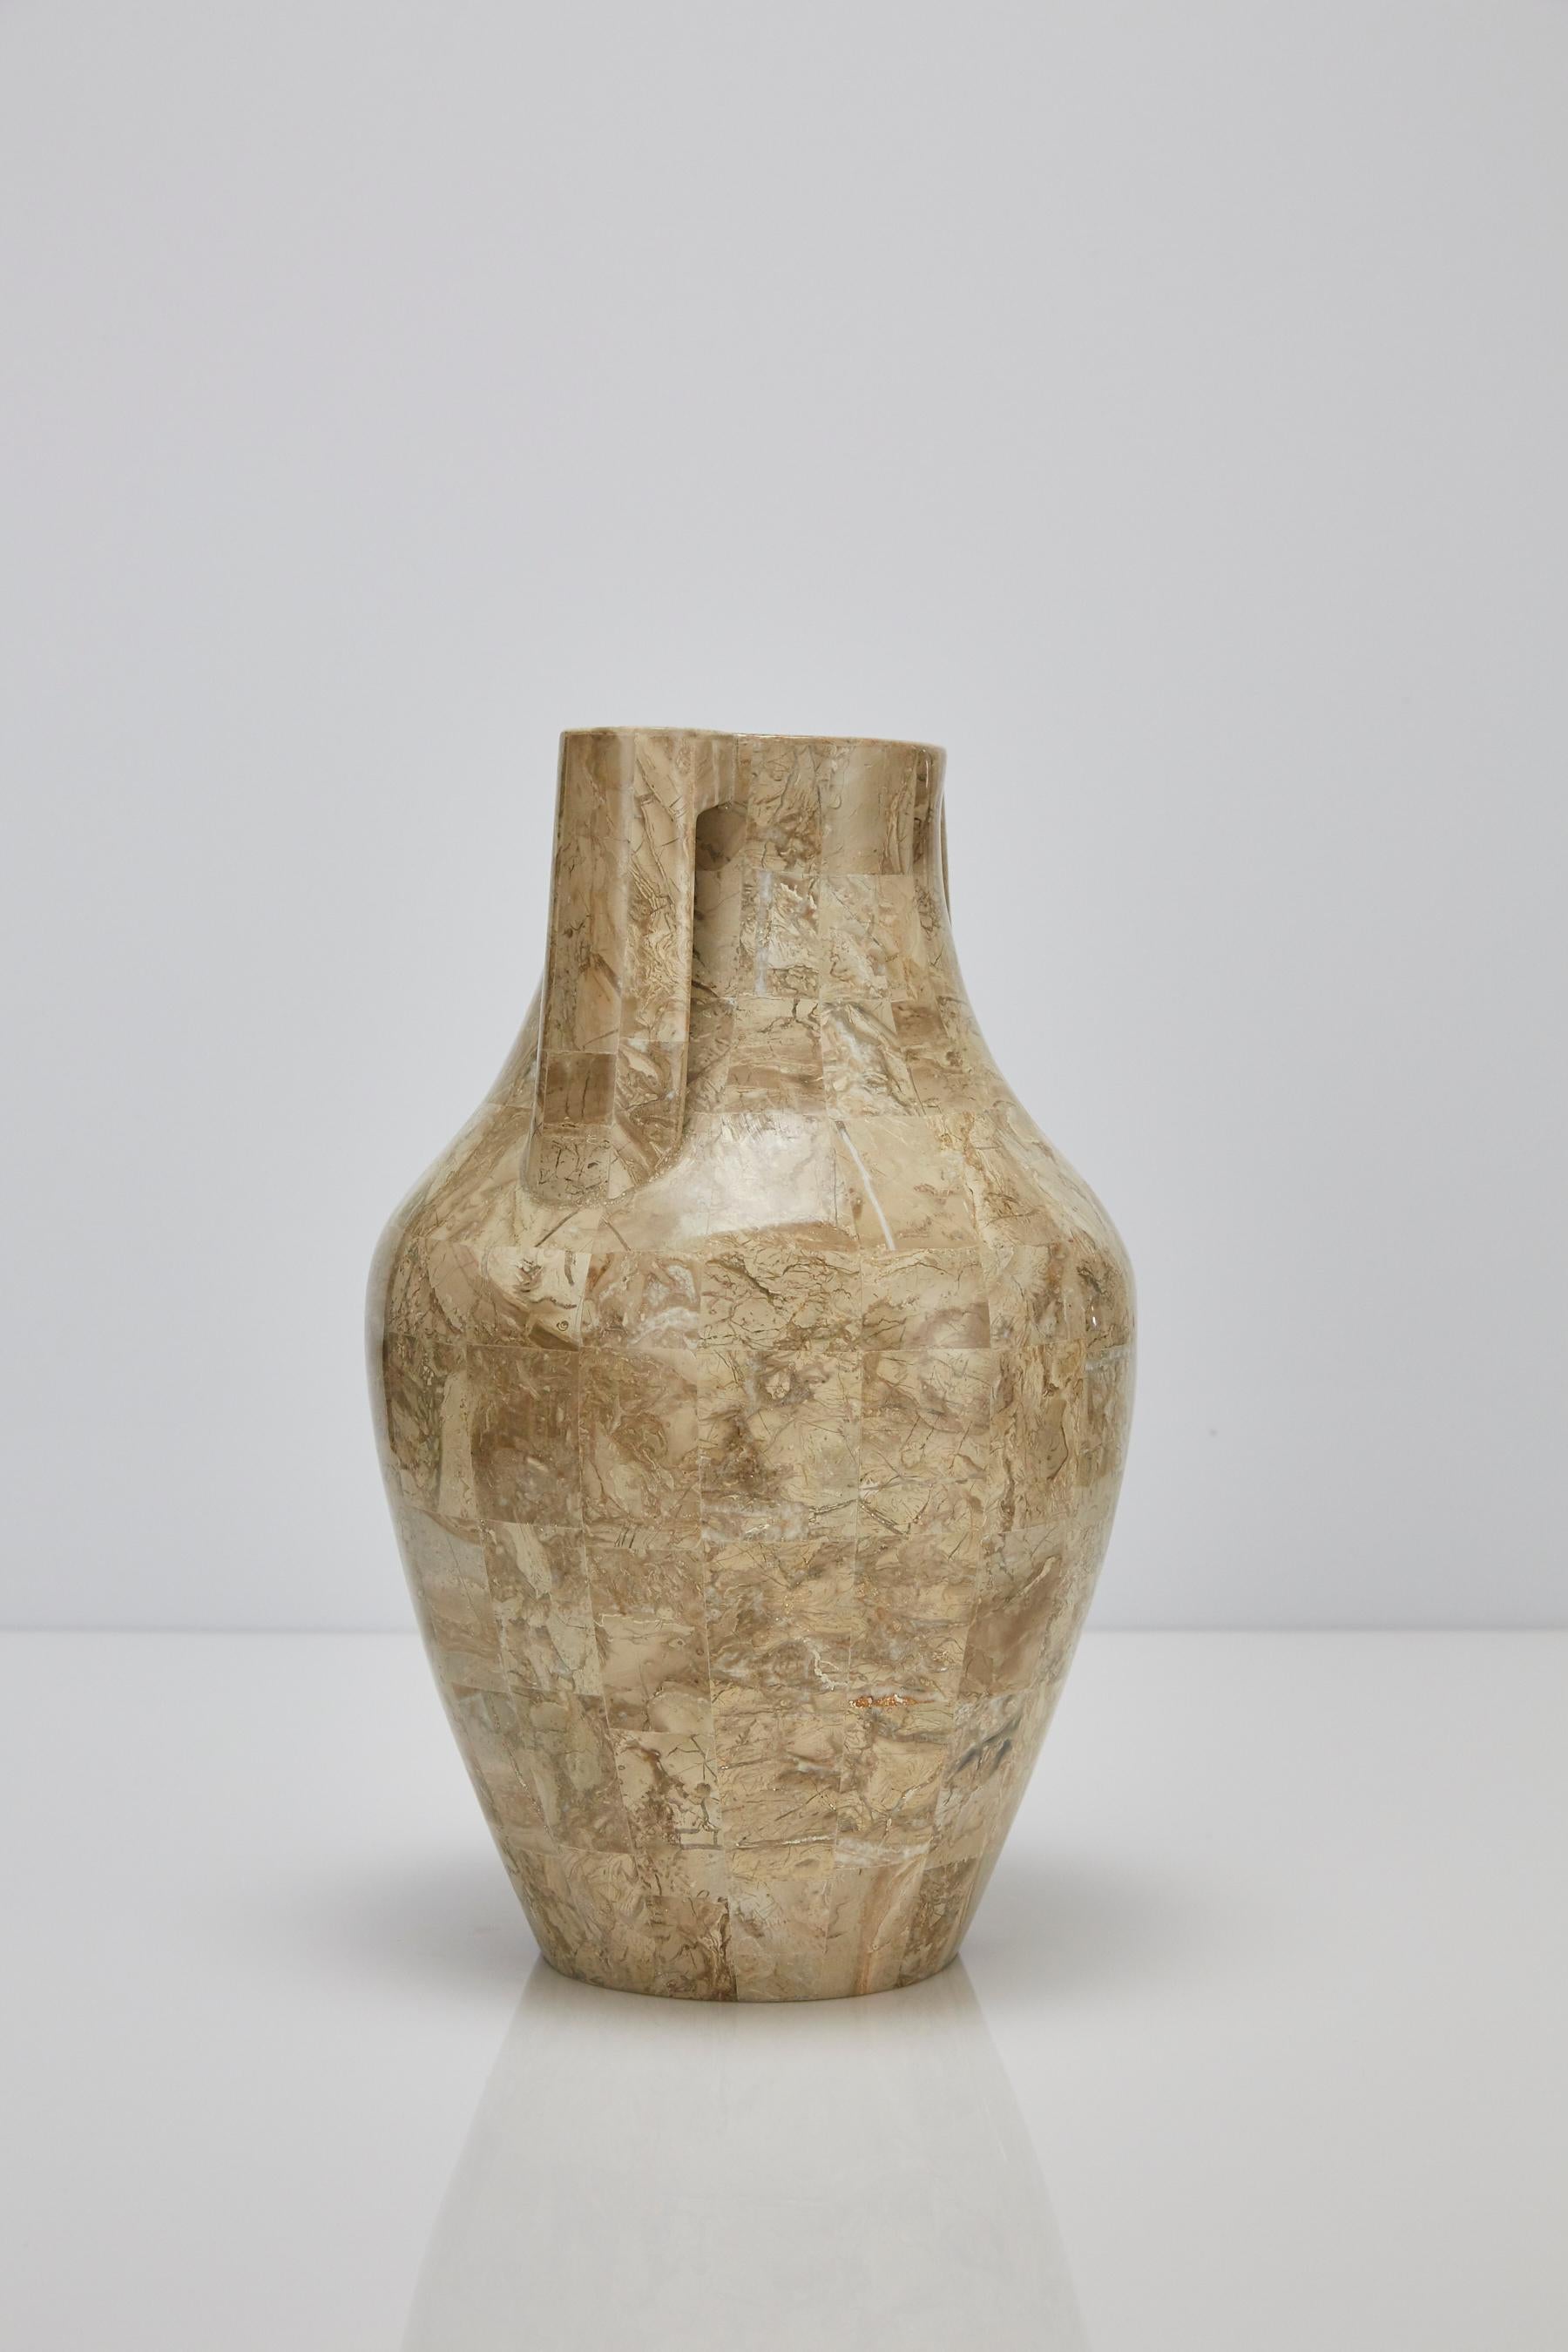 Tall vase styled in the form of a Mesopotamian water jug. Body of vase executed in fiberglass with inlaid cantor stone over the exterior.

Pair available.

All furnishings are made from 100% natural Fossil Stone or Seashell inlay, carefully hand cut